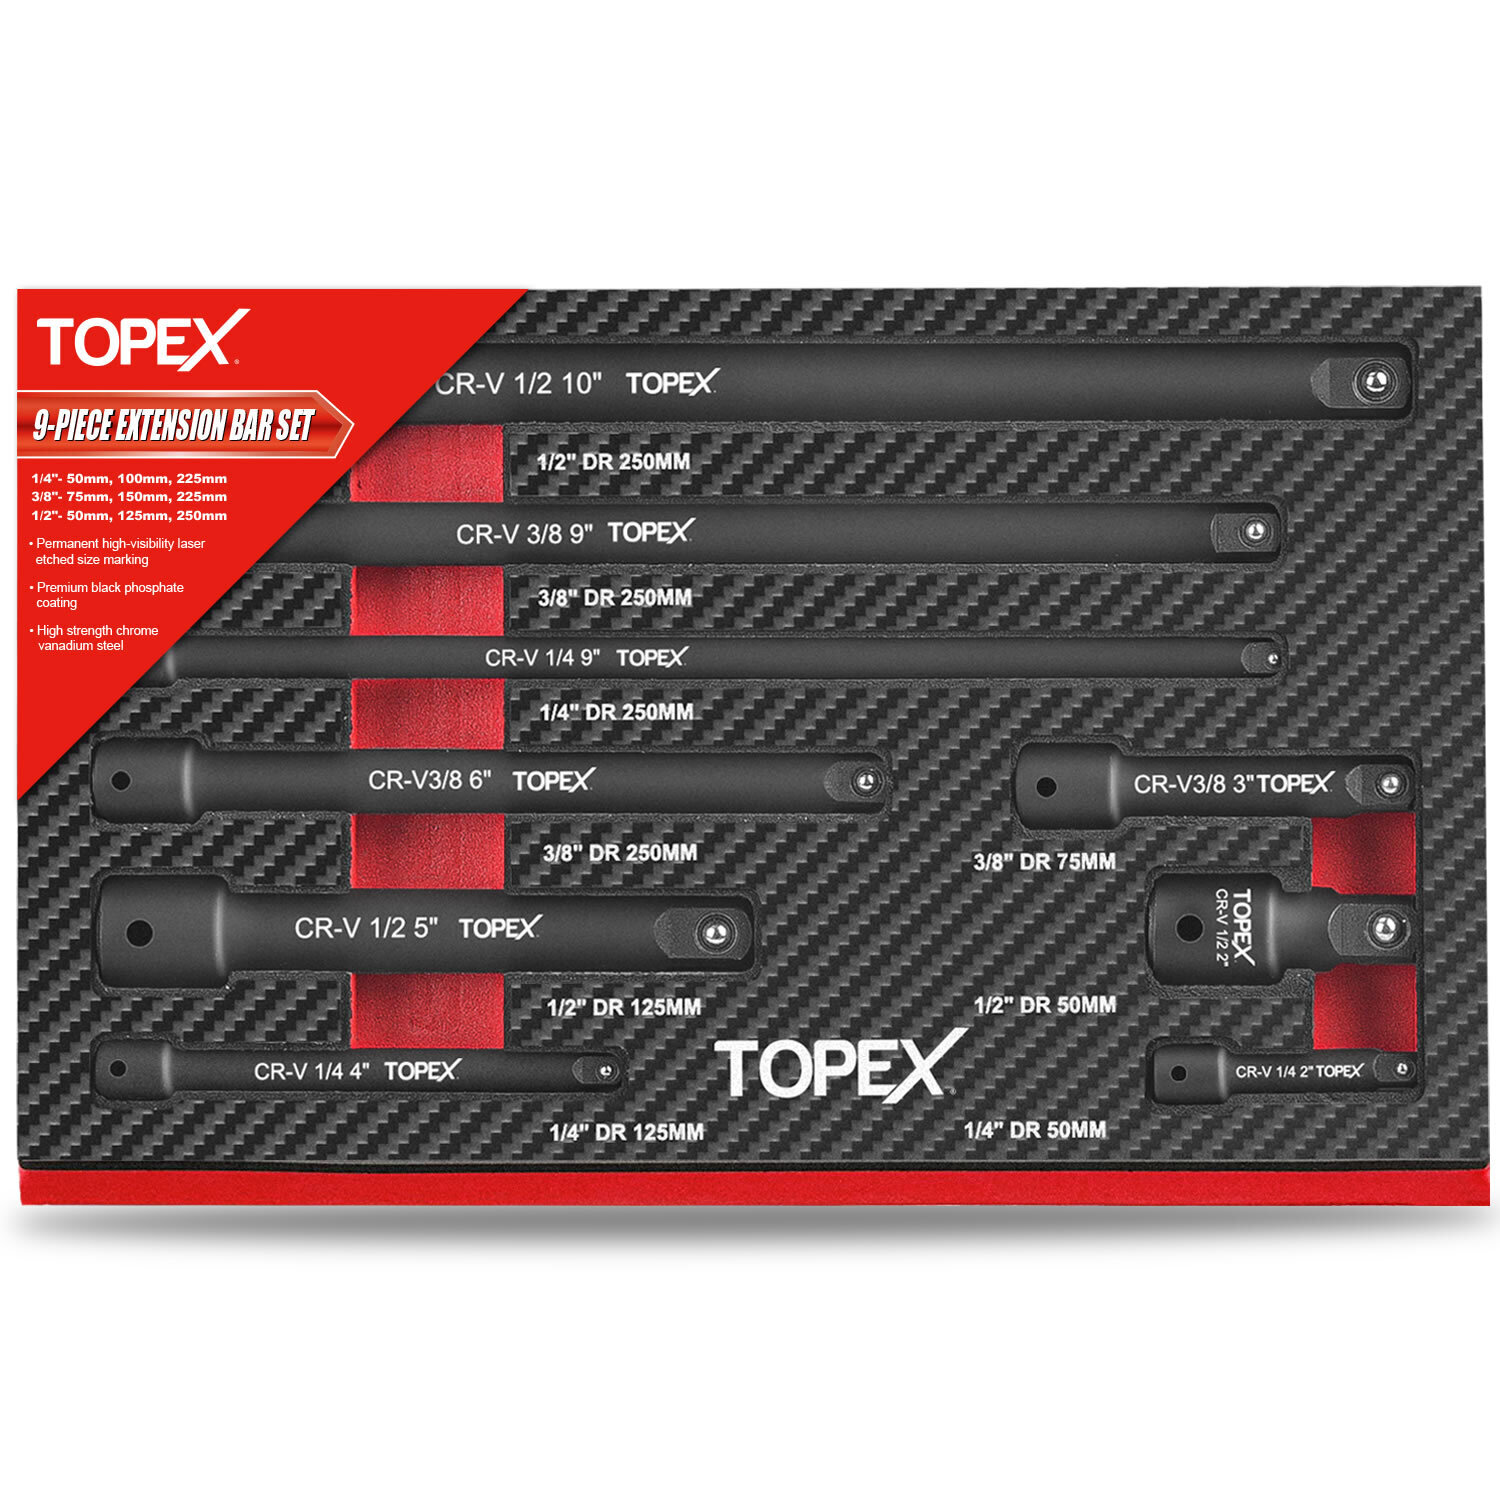 TOPEX 9-Piece Extension Bar Set 1/4" 3/8" and 1/2" Black Drive Socket Extensions